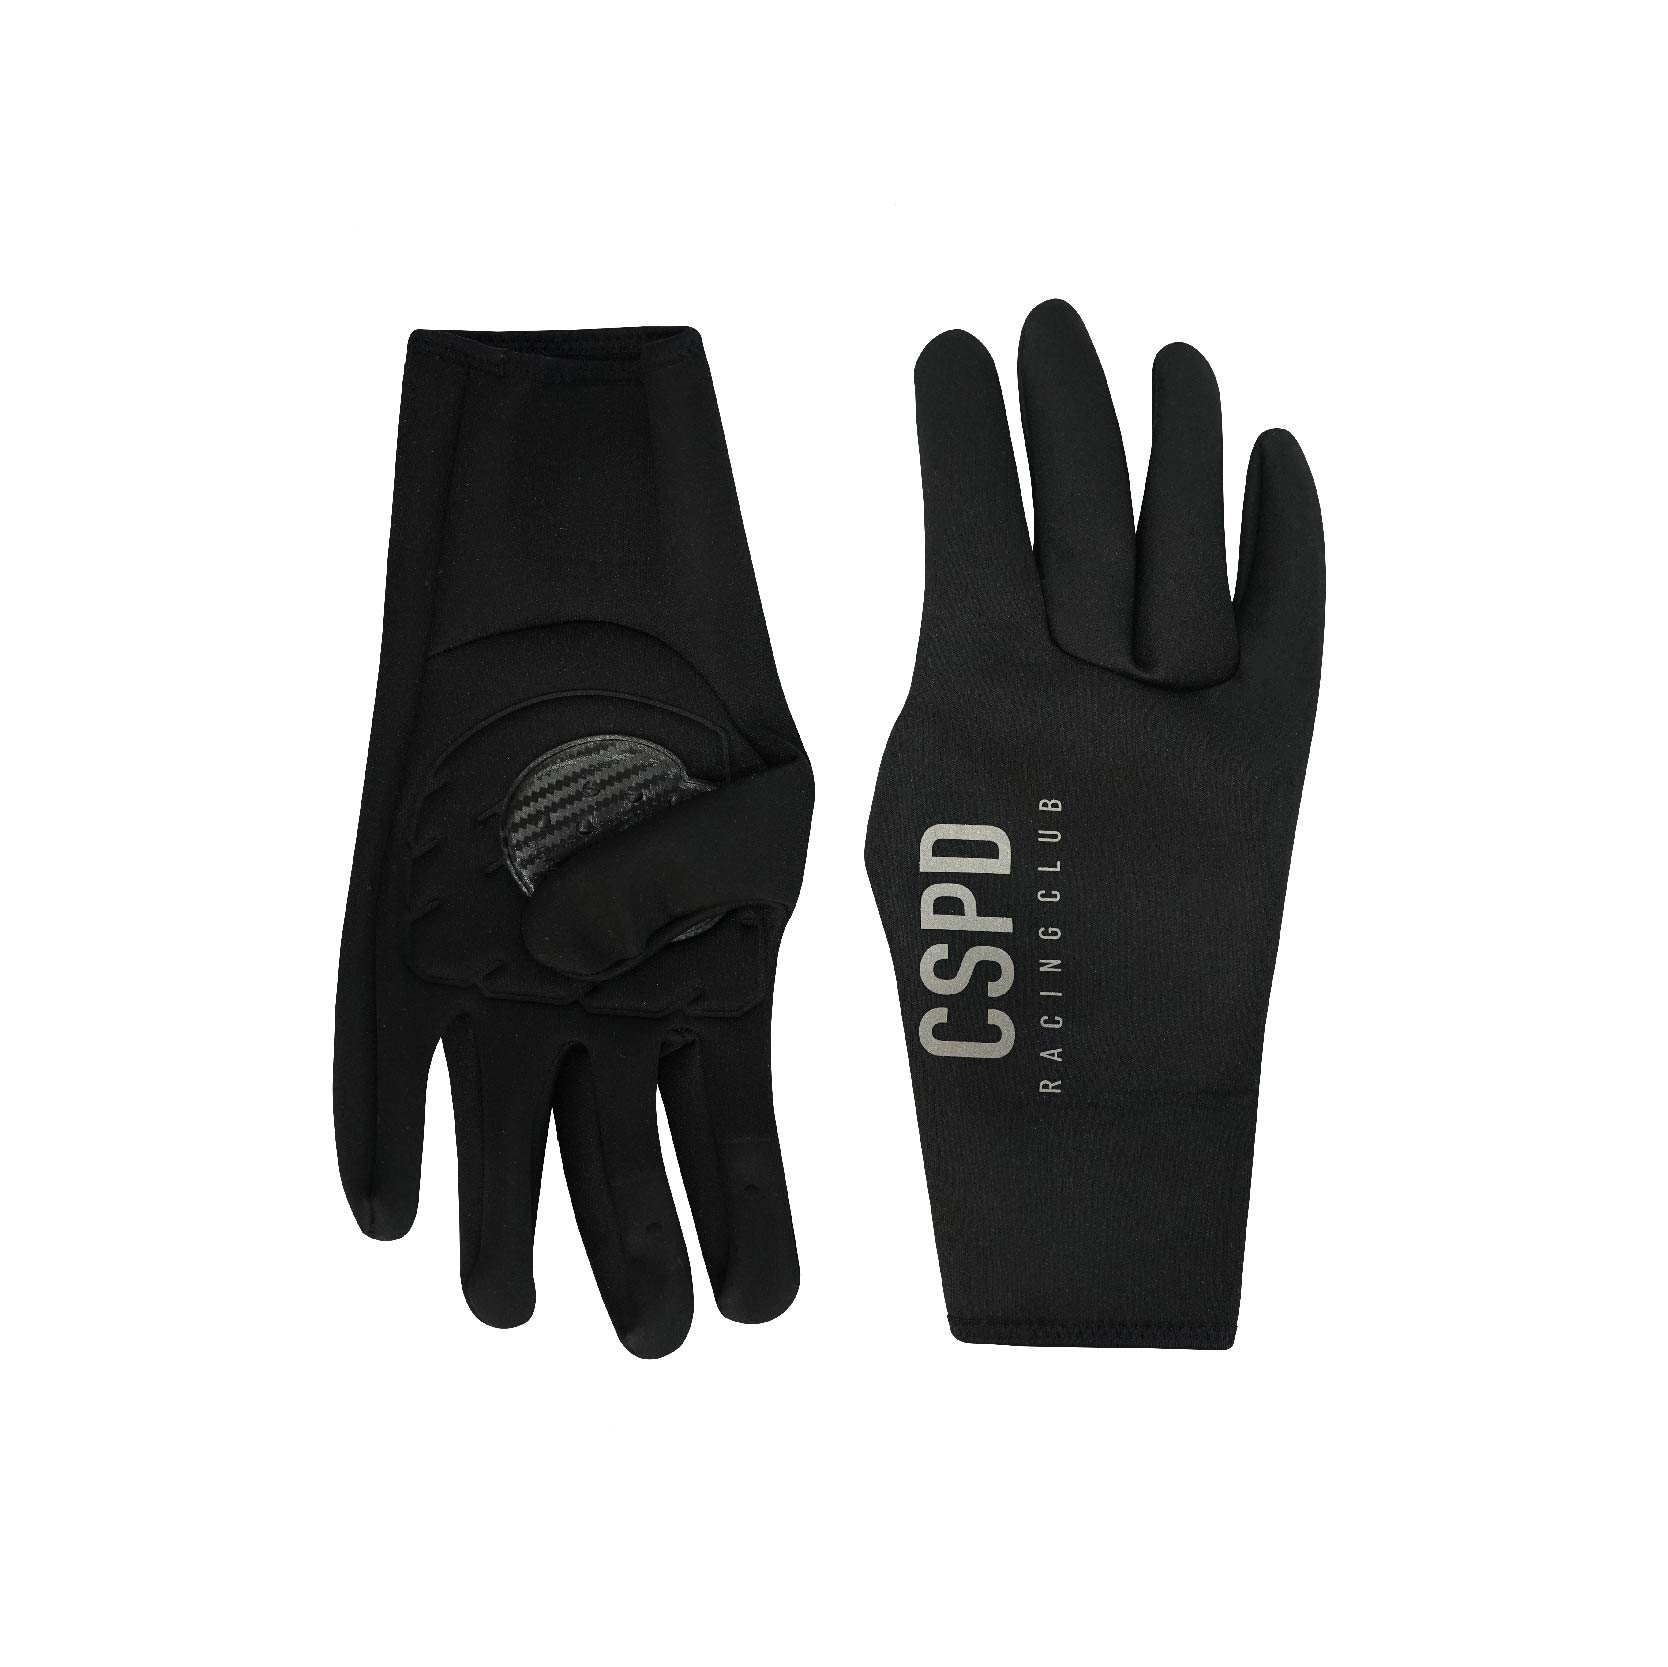 [CSPD ZERO COLLECTION] GLOVES - WATER PROOF+